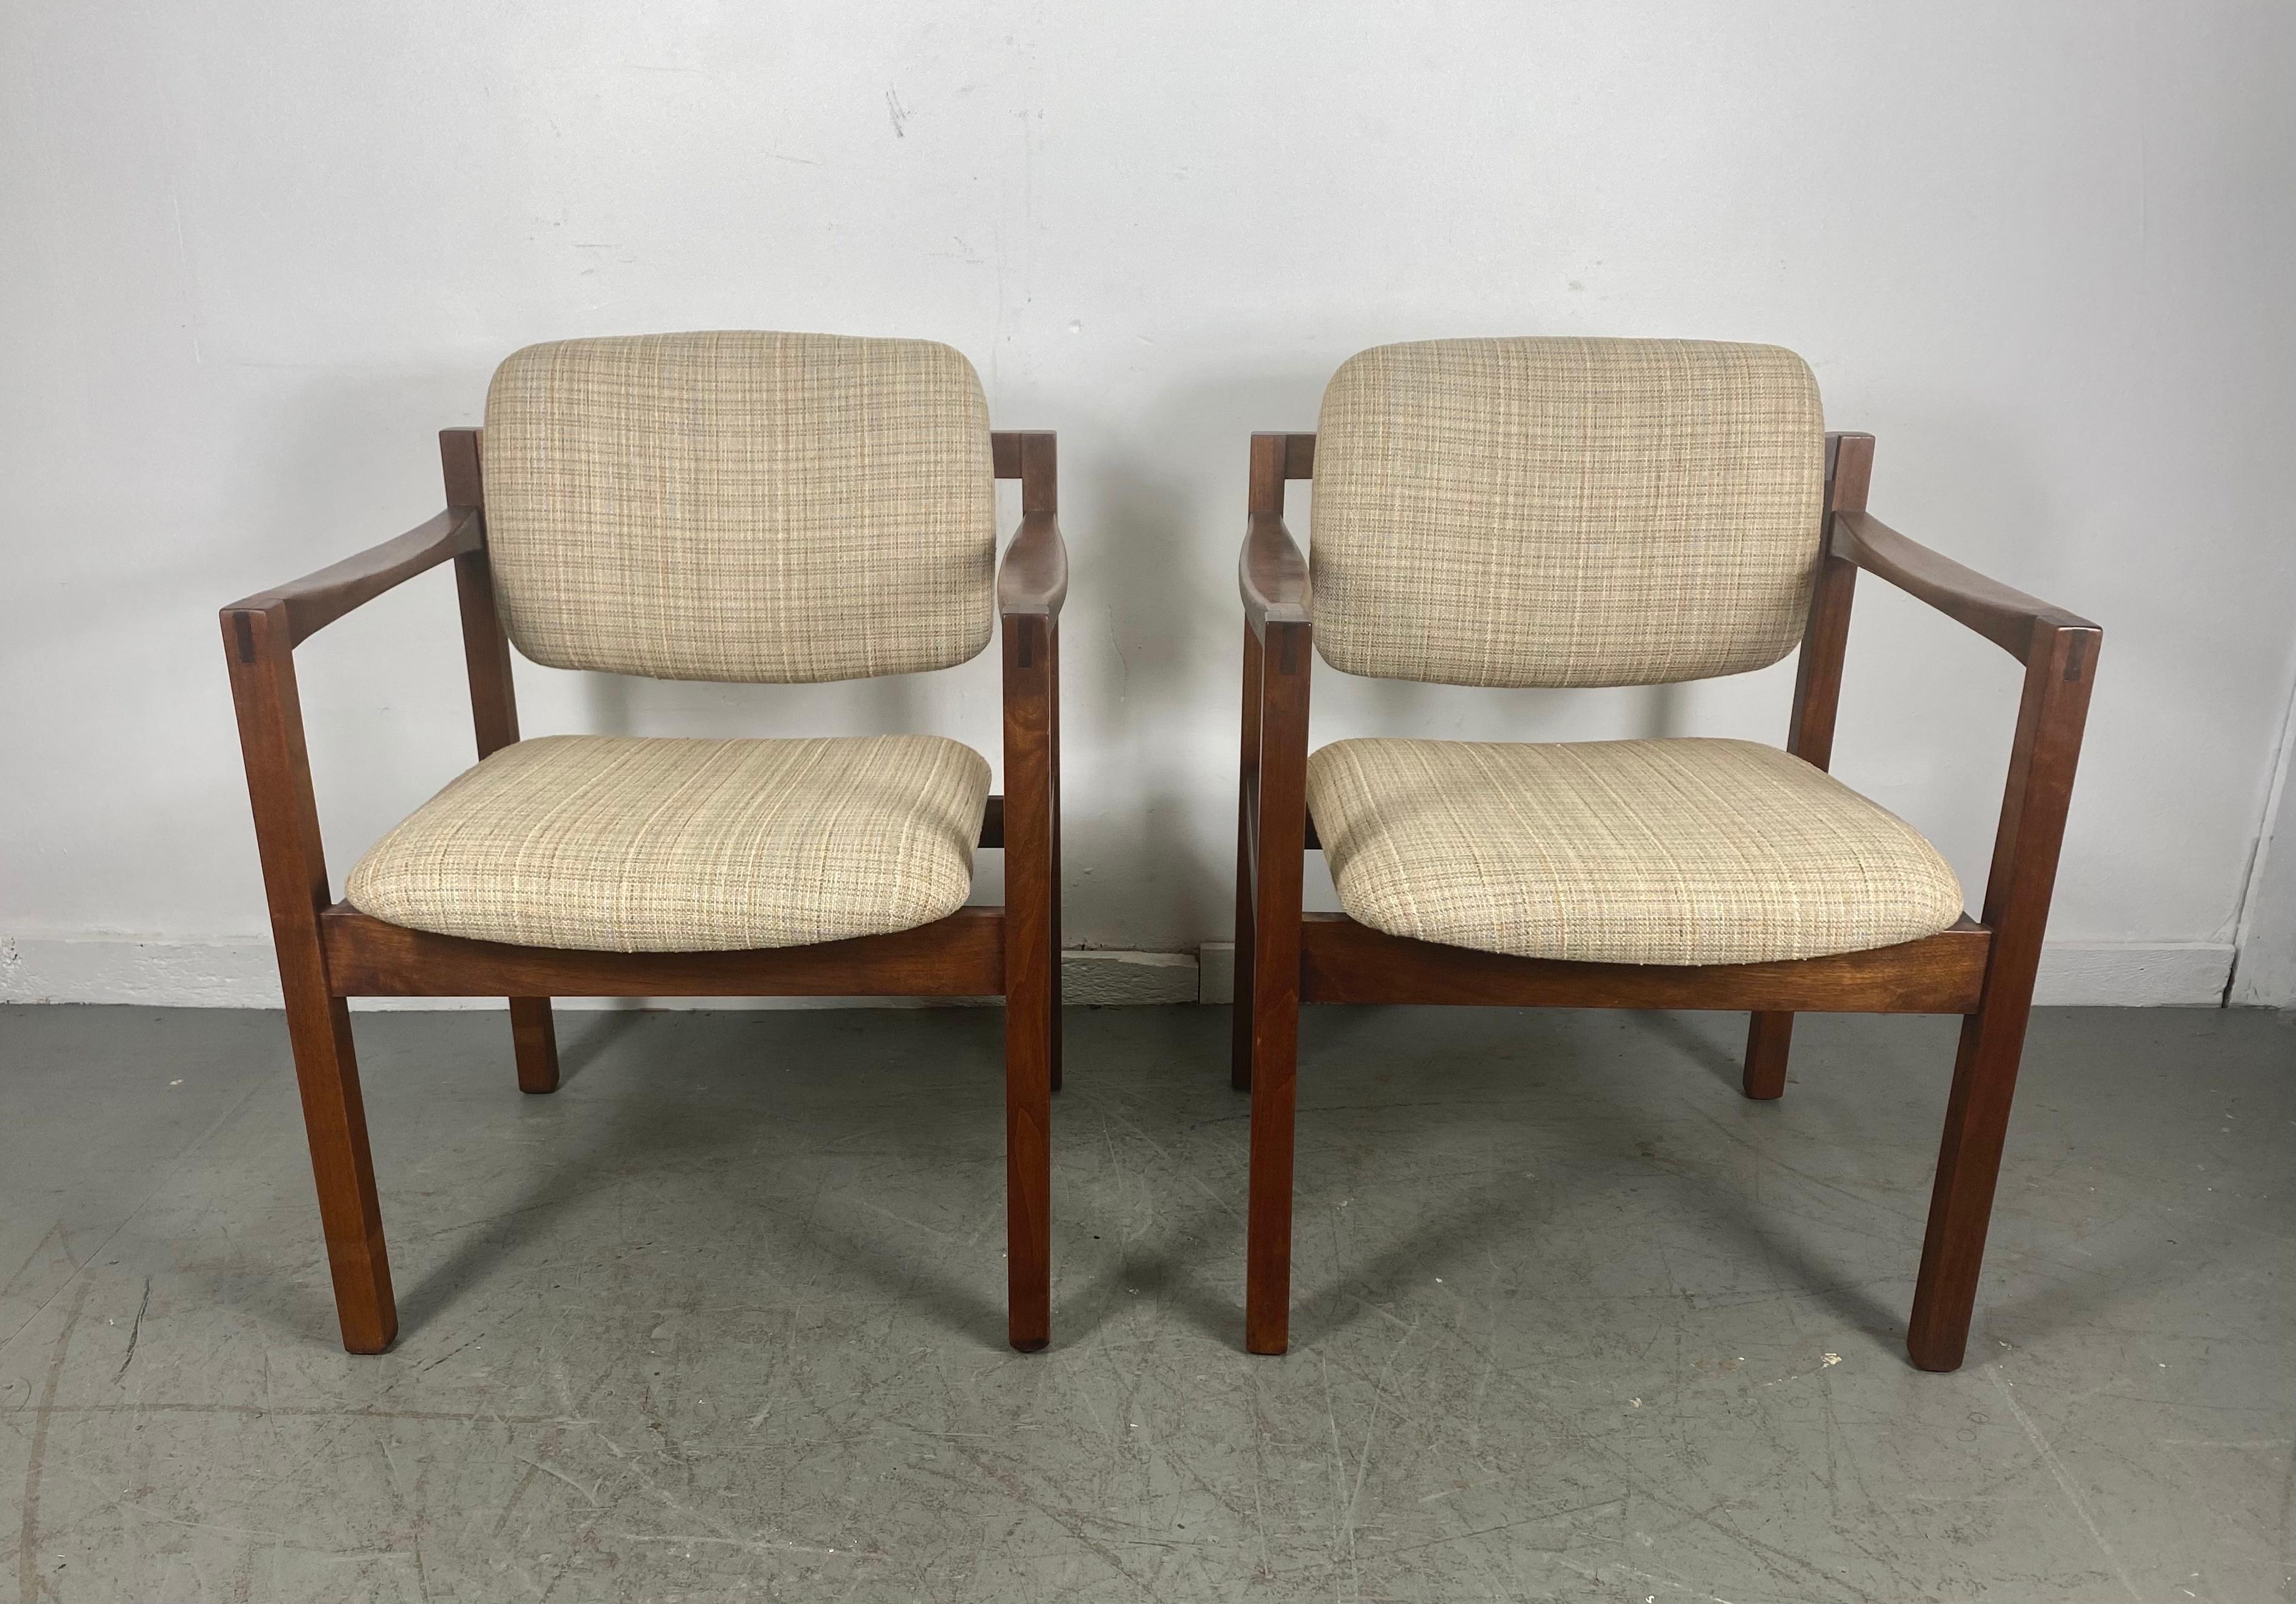 Stunning Pair Modernist Walnut Arm Chairs by Stow Davis /after Jens Risom For Sale 4